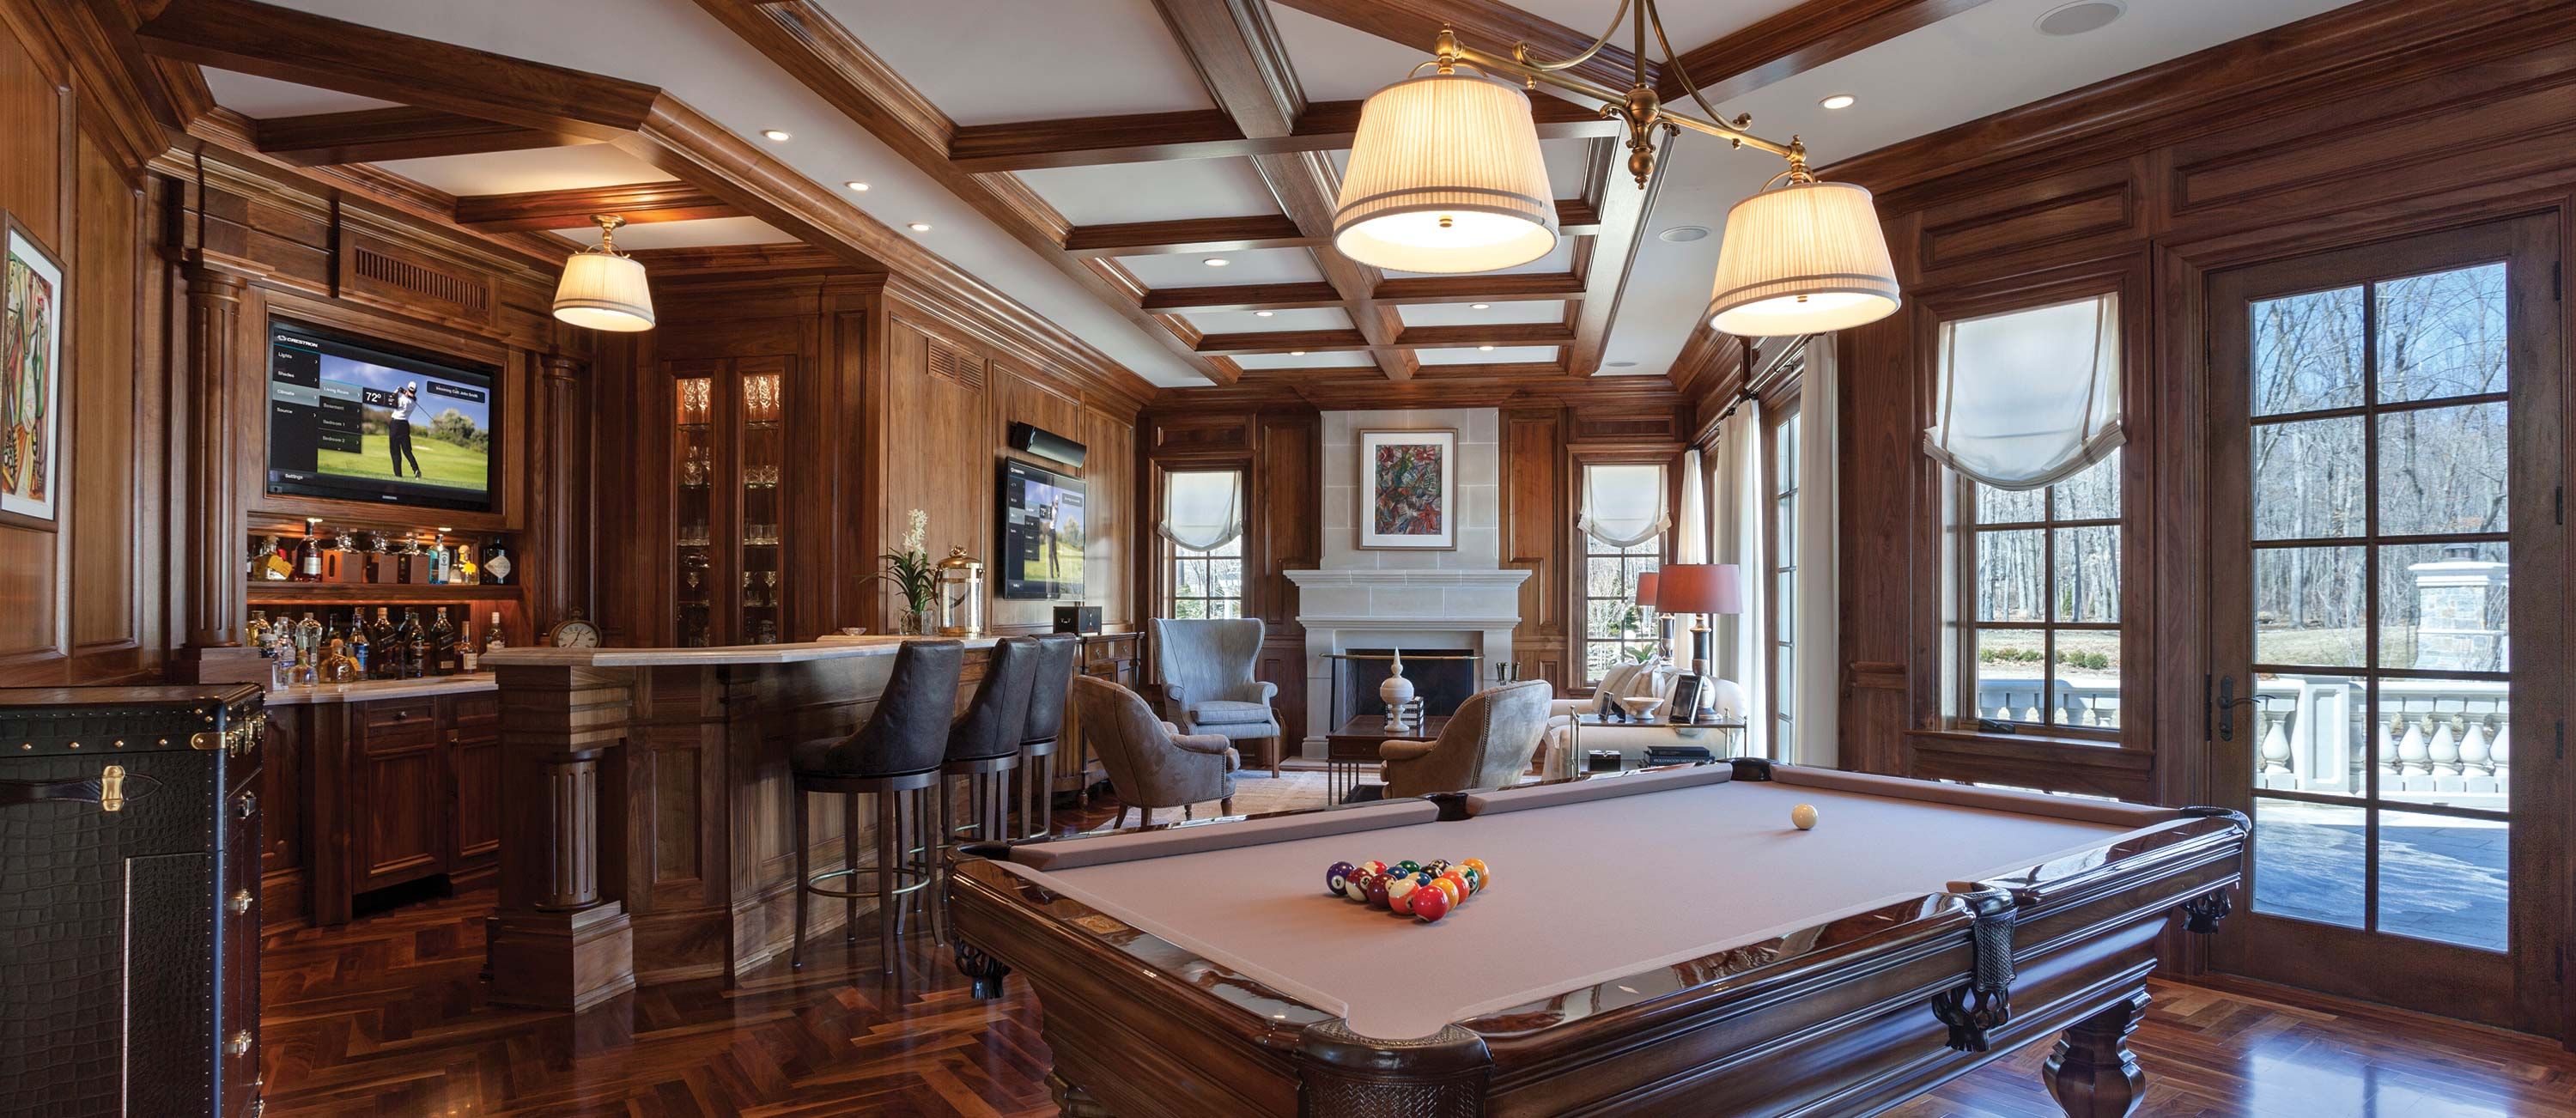 wooden bar room with pool table and crestron technology